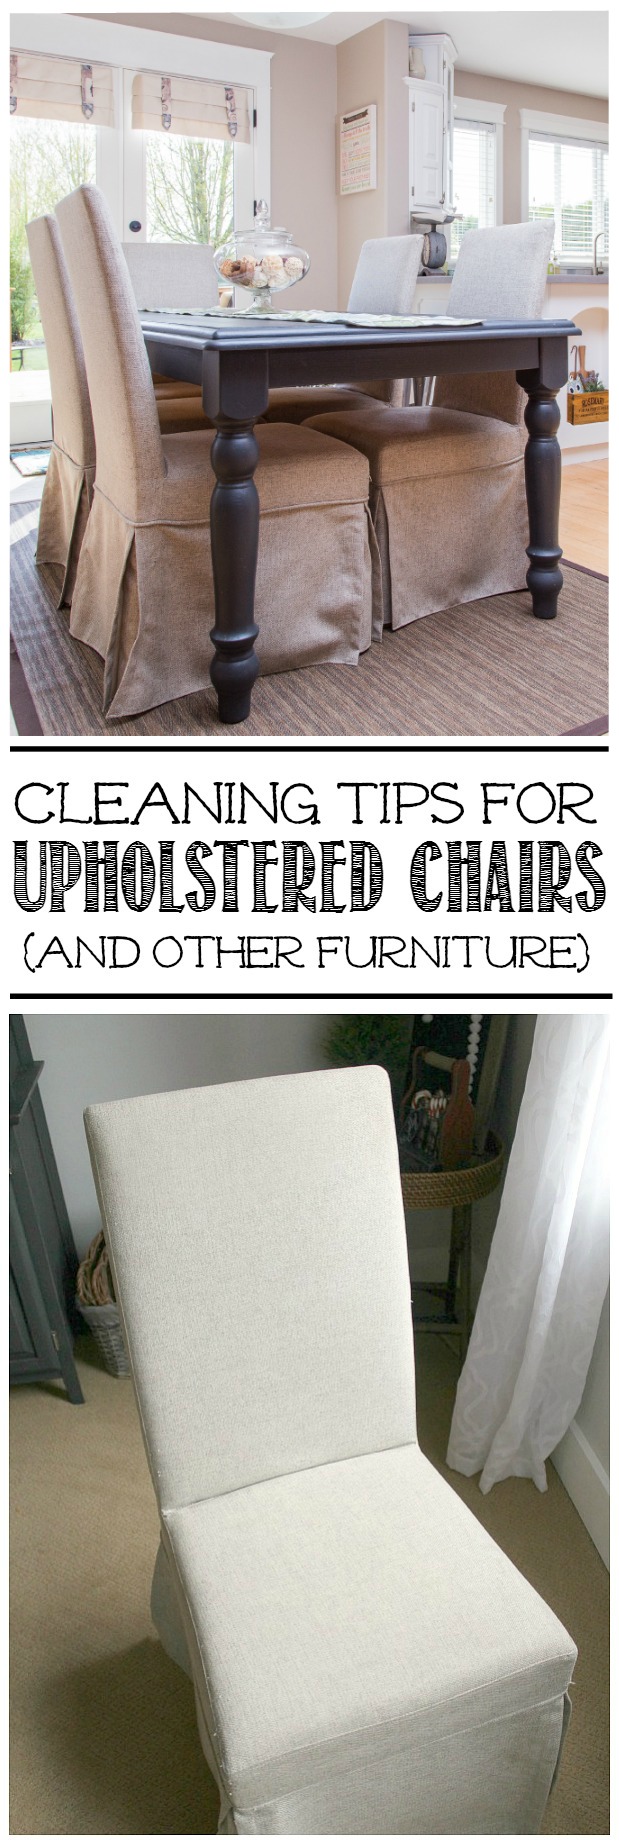 Great tips for cleaning upholstered chairs or other furniture.